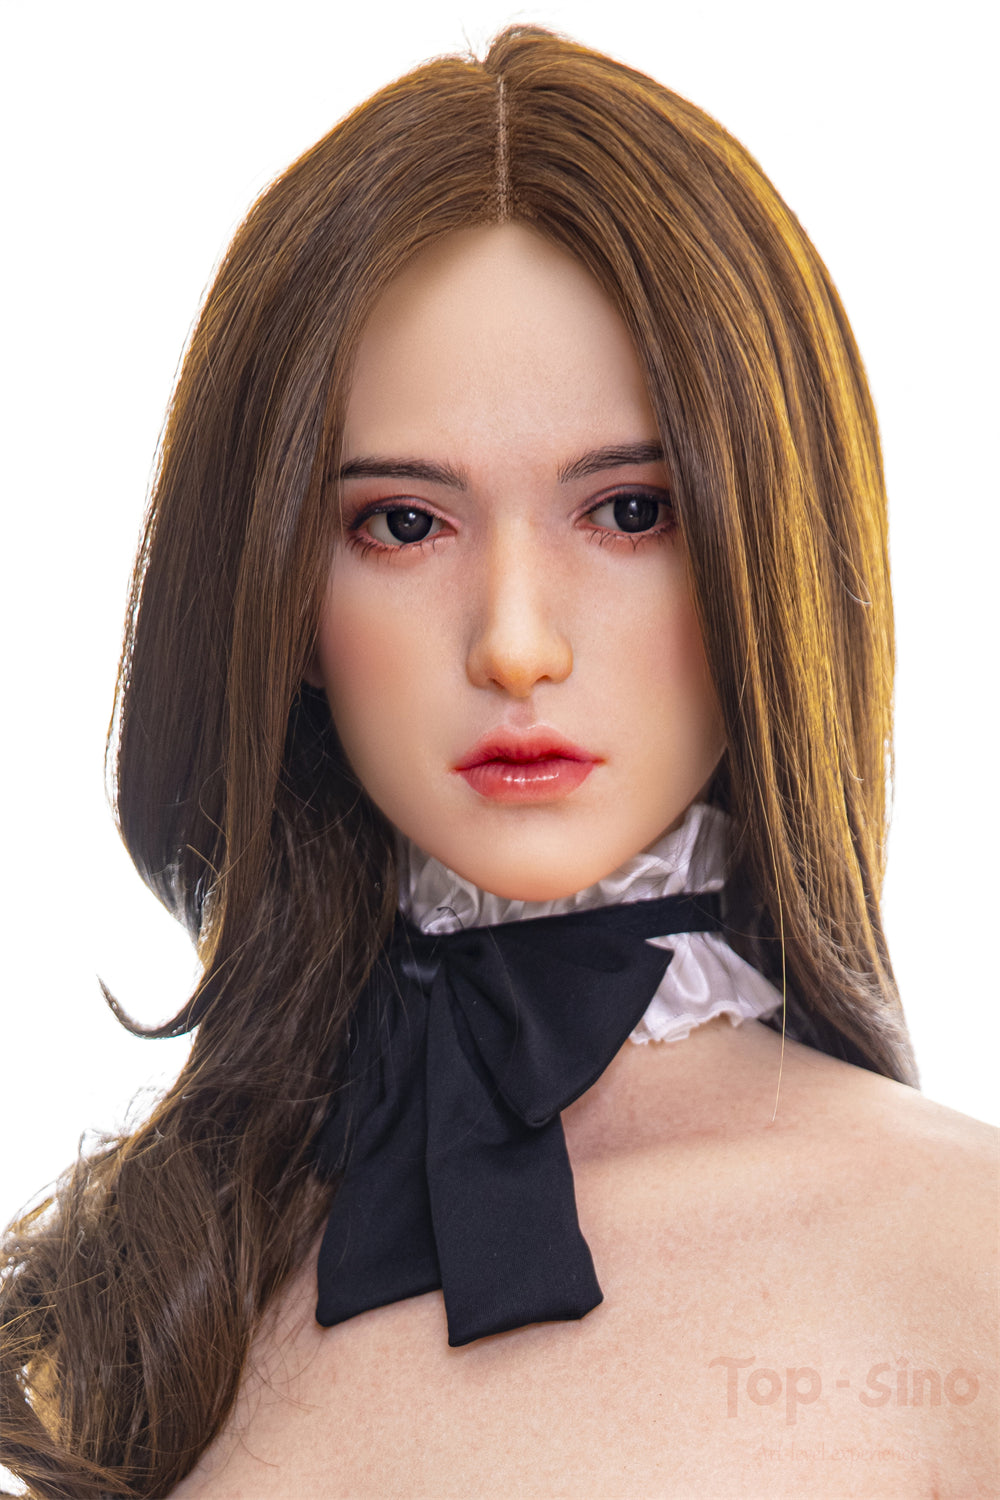 Top Sino 158 cm B Platinum Silicone - Missy | Buy Sex Dolls at DOLLS ACTUALLY